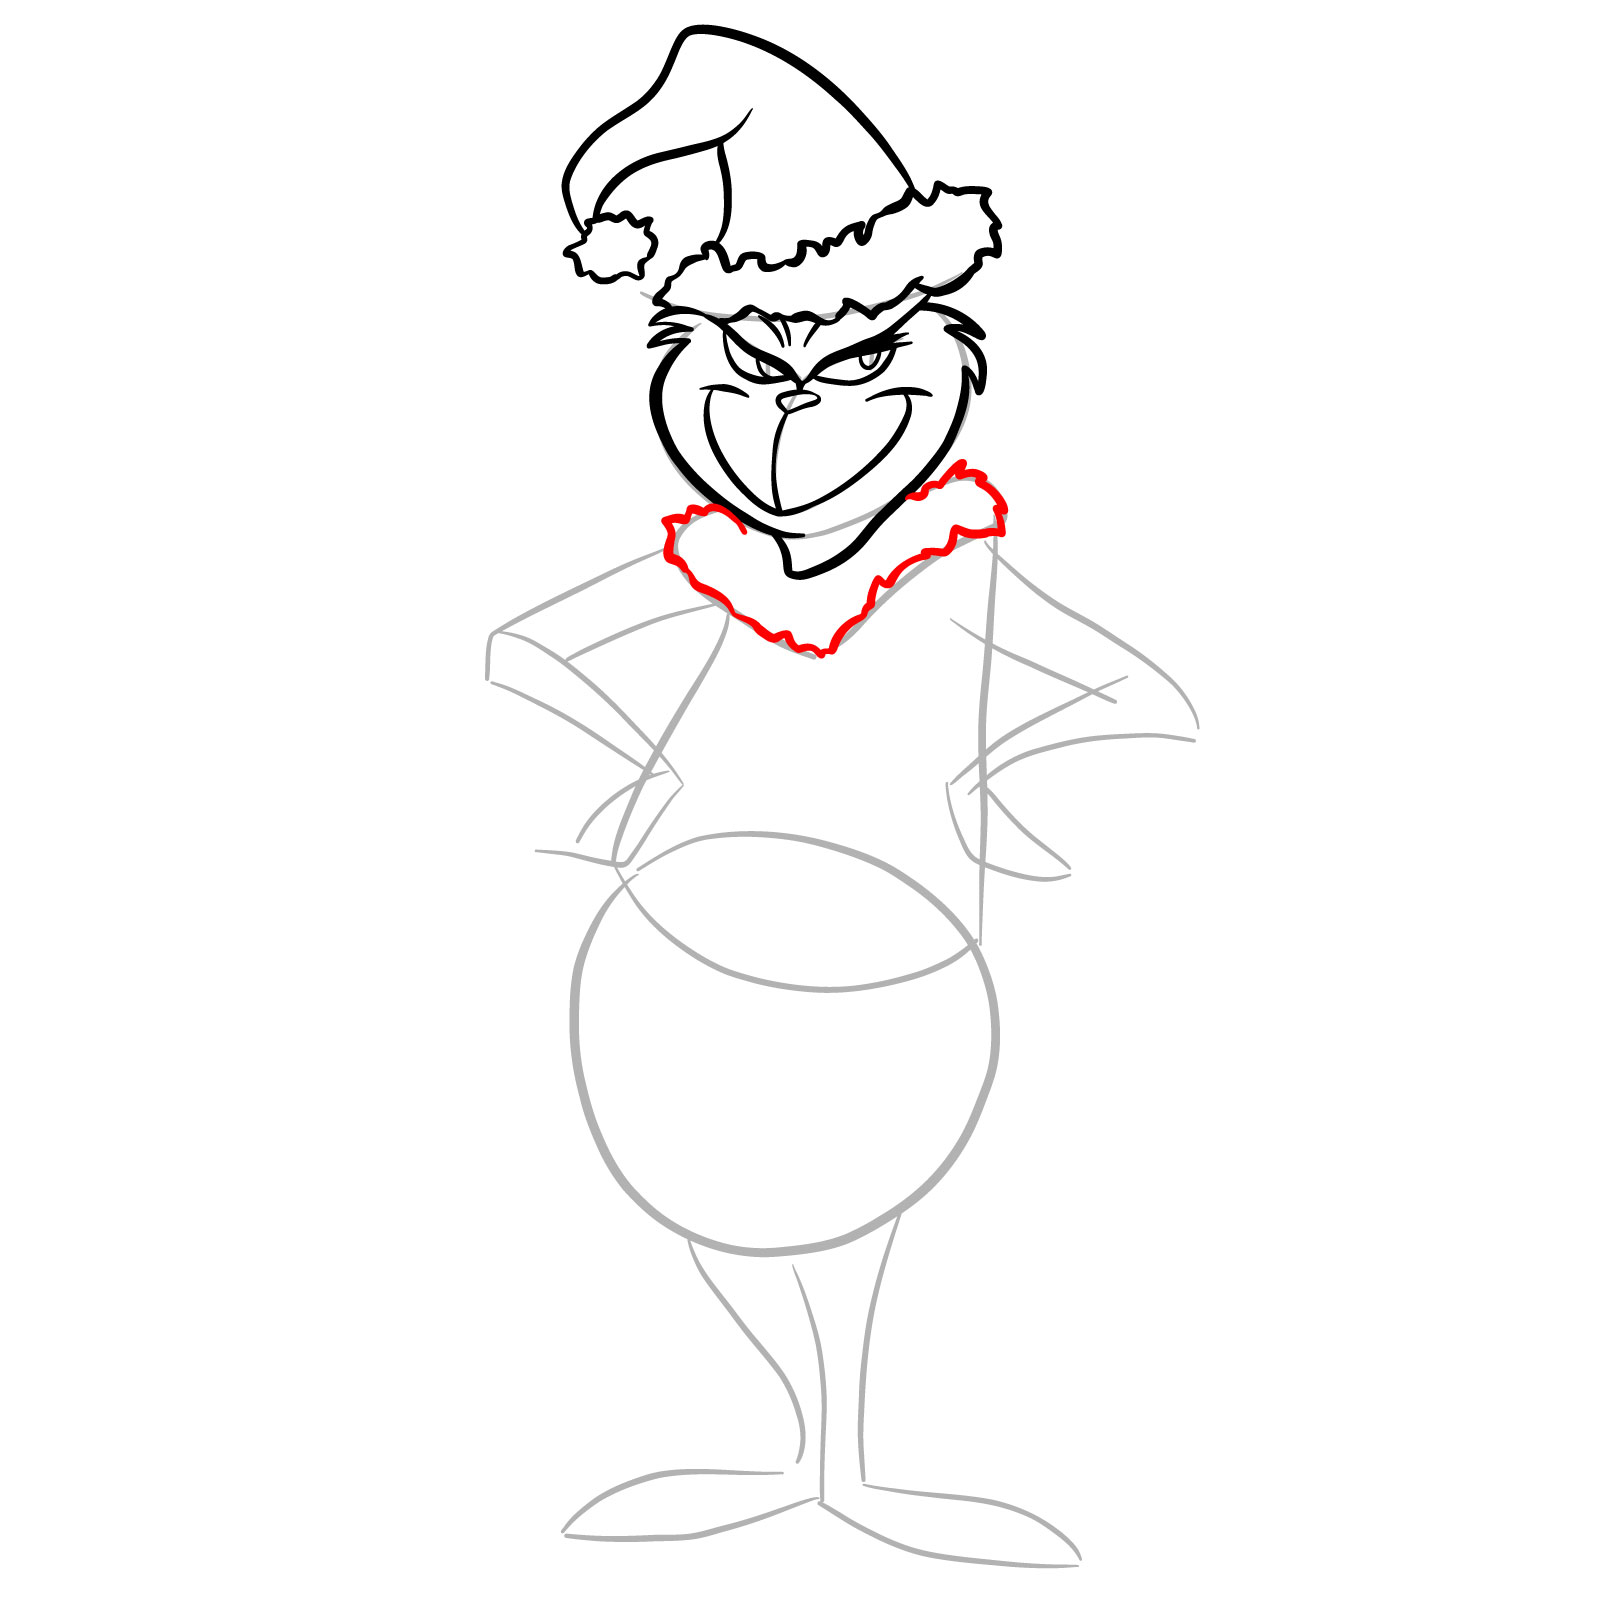 How to draw The Grinch in a Christmas costume - step 12